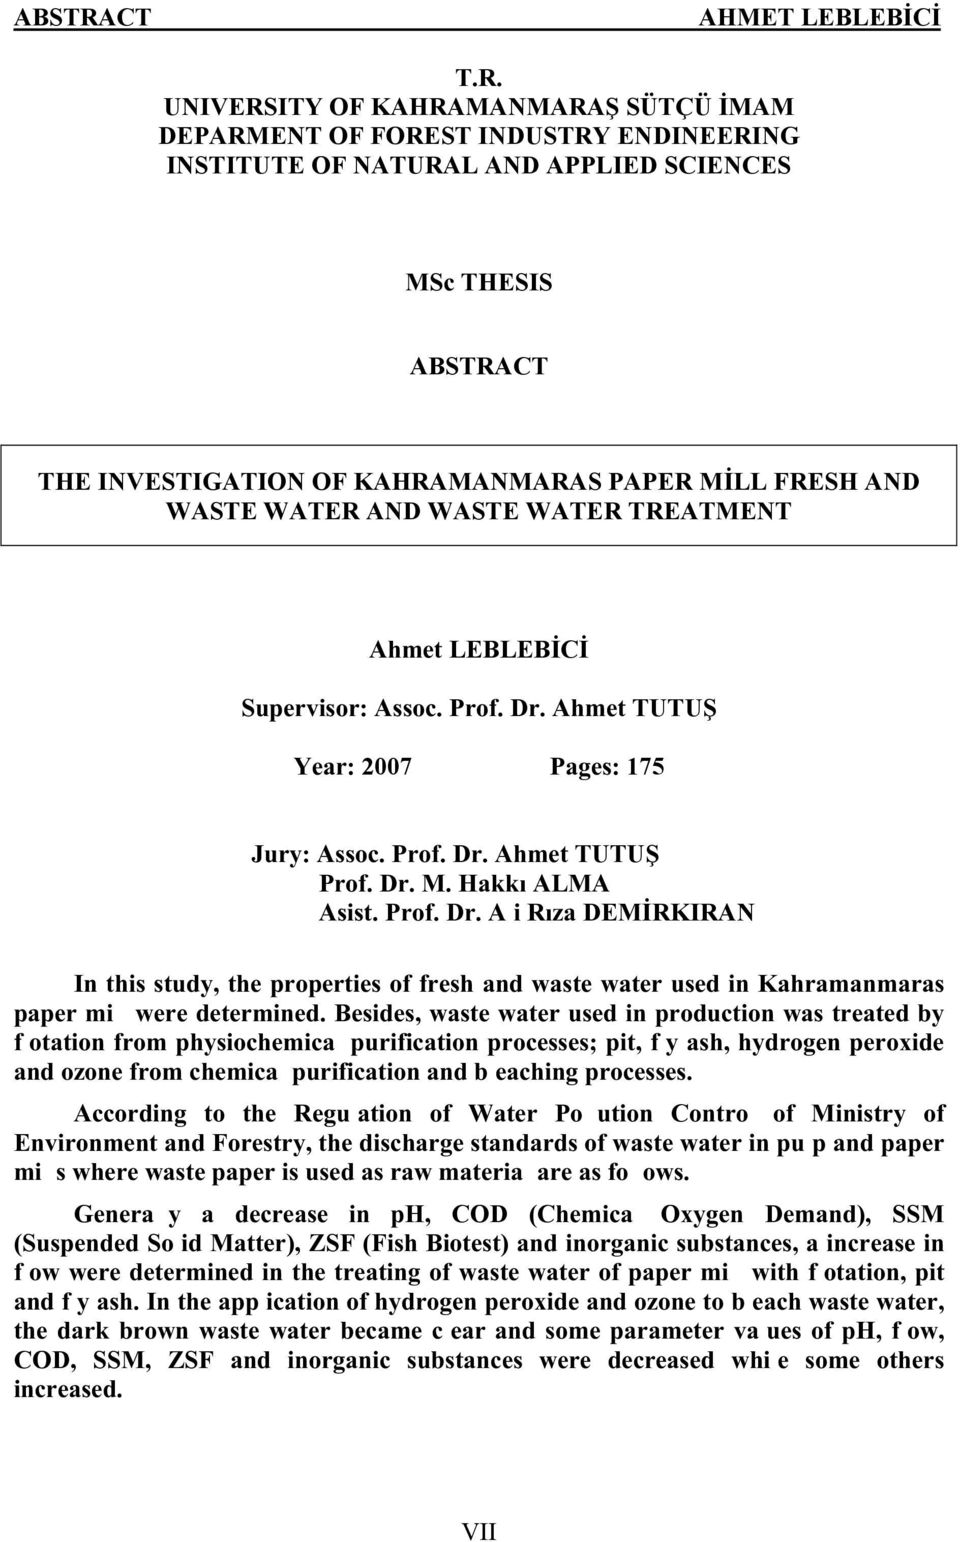 UNIVERSITY OF KAHRAMANMARAŞ SÜTÇÜ İMAM DEPARMENT OF FOREST INDUSTRY ENDINEERING INSTITUTE OF NATURAL AND APPLIED SCIENCES MSc THESIS CT THE INVESTIGATION OF KAHRAMANMARAS PAPER MİLL FRESH AND WASTE